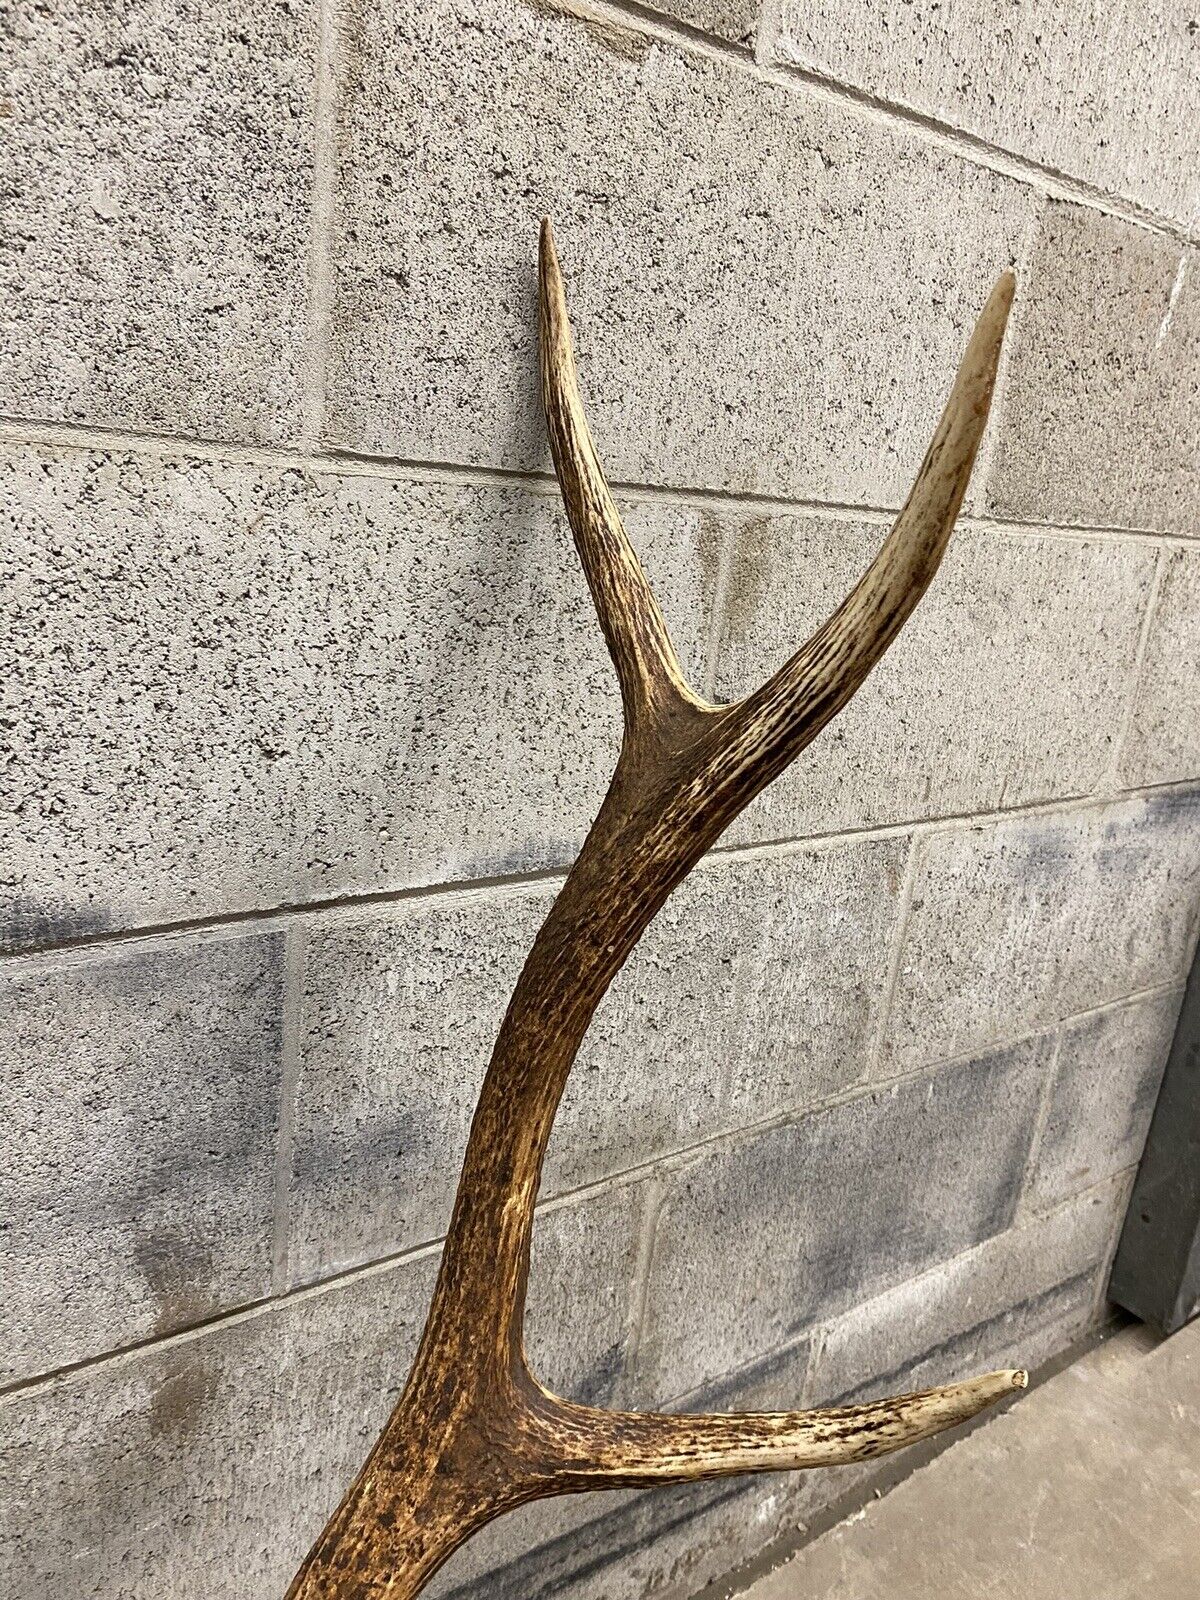 Vintage Large Red Deer Stag Antlers Horn Skull Mount Taxidermy Wall Decor